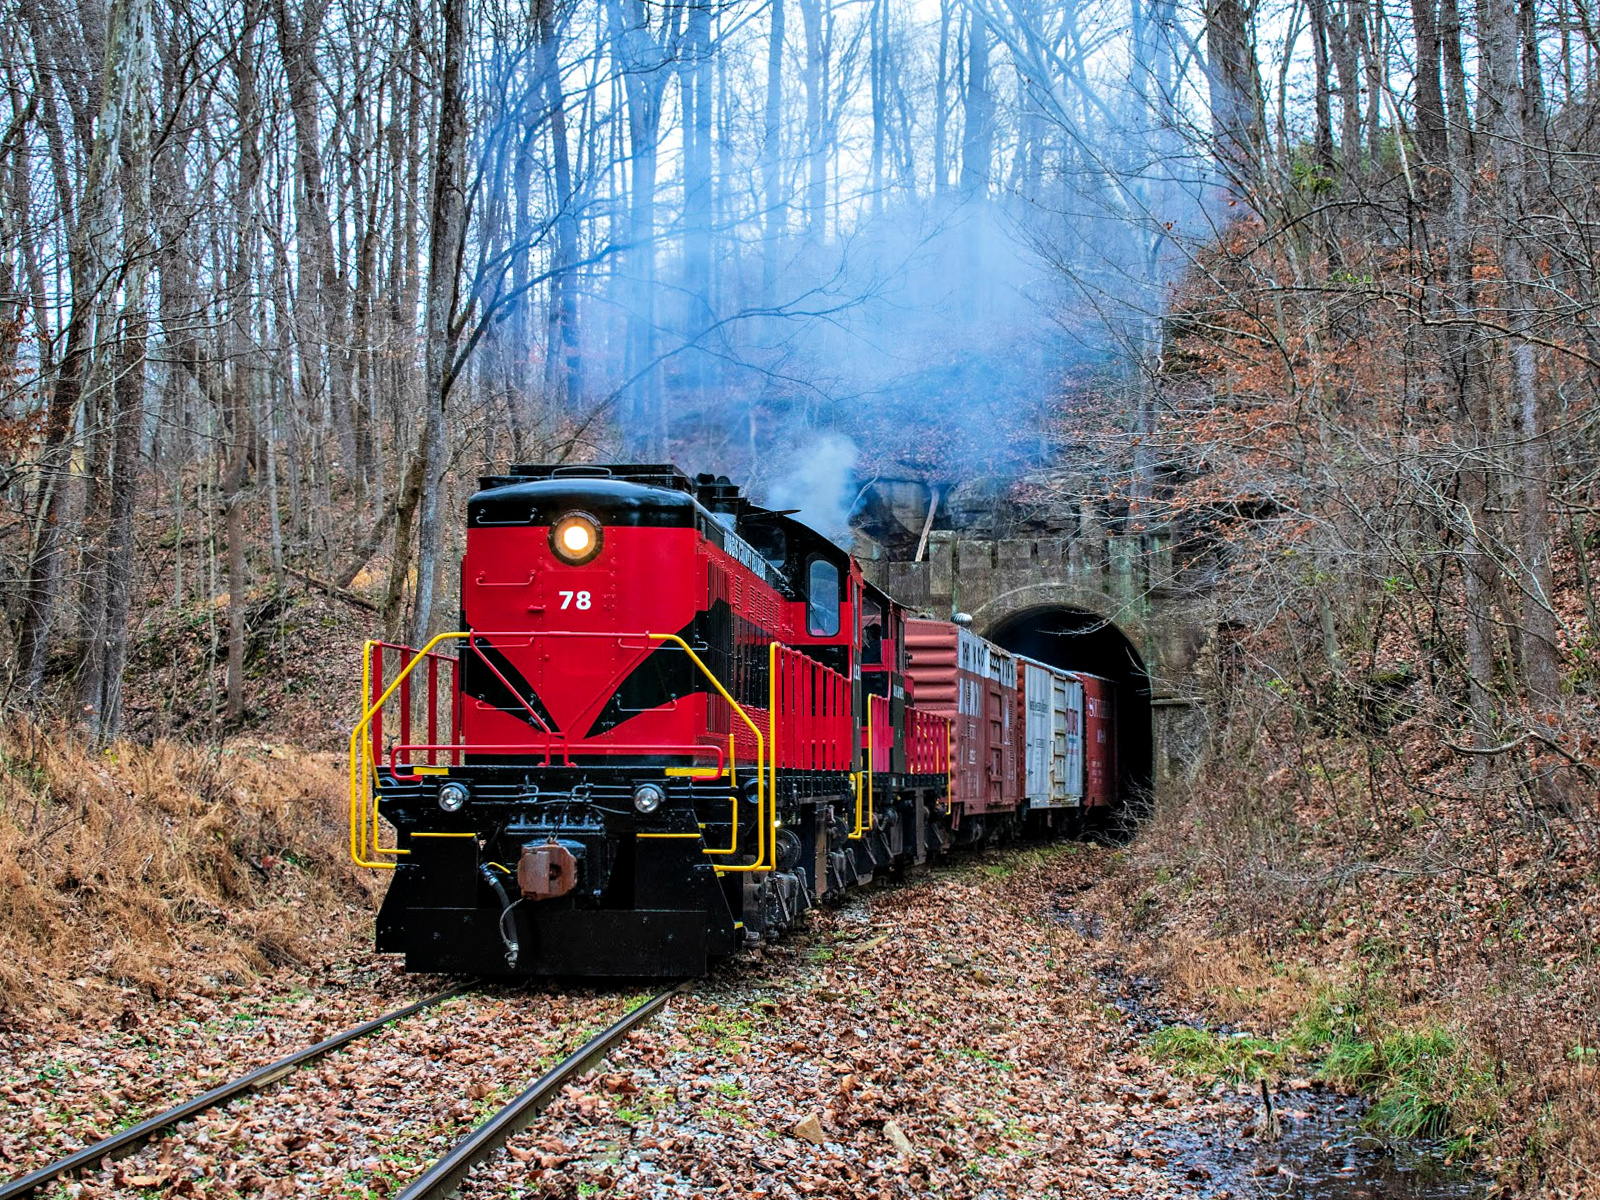 DCRR 78 is a class Alco S2 and  is pictured in Norton, Indiana, United States.  This was taken along the French Lick Branch on the Dubois County Railroad. Photo Copyright: David Rohdenburg uploaded to Railroad Gallery on 11/19/2022. This photograph of DCRR 78 was taken on Sunday, December 13, 2020. All Rights Reserved. 